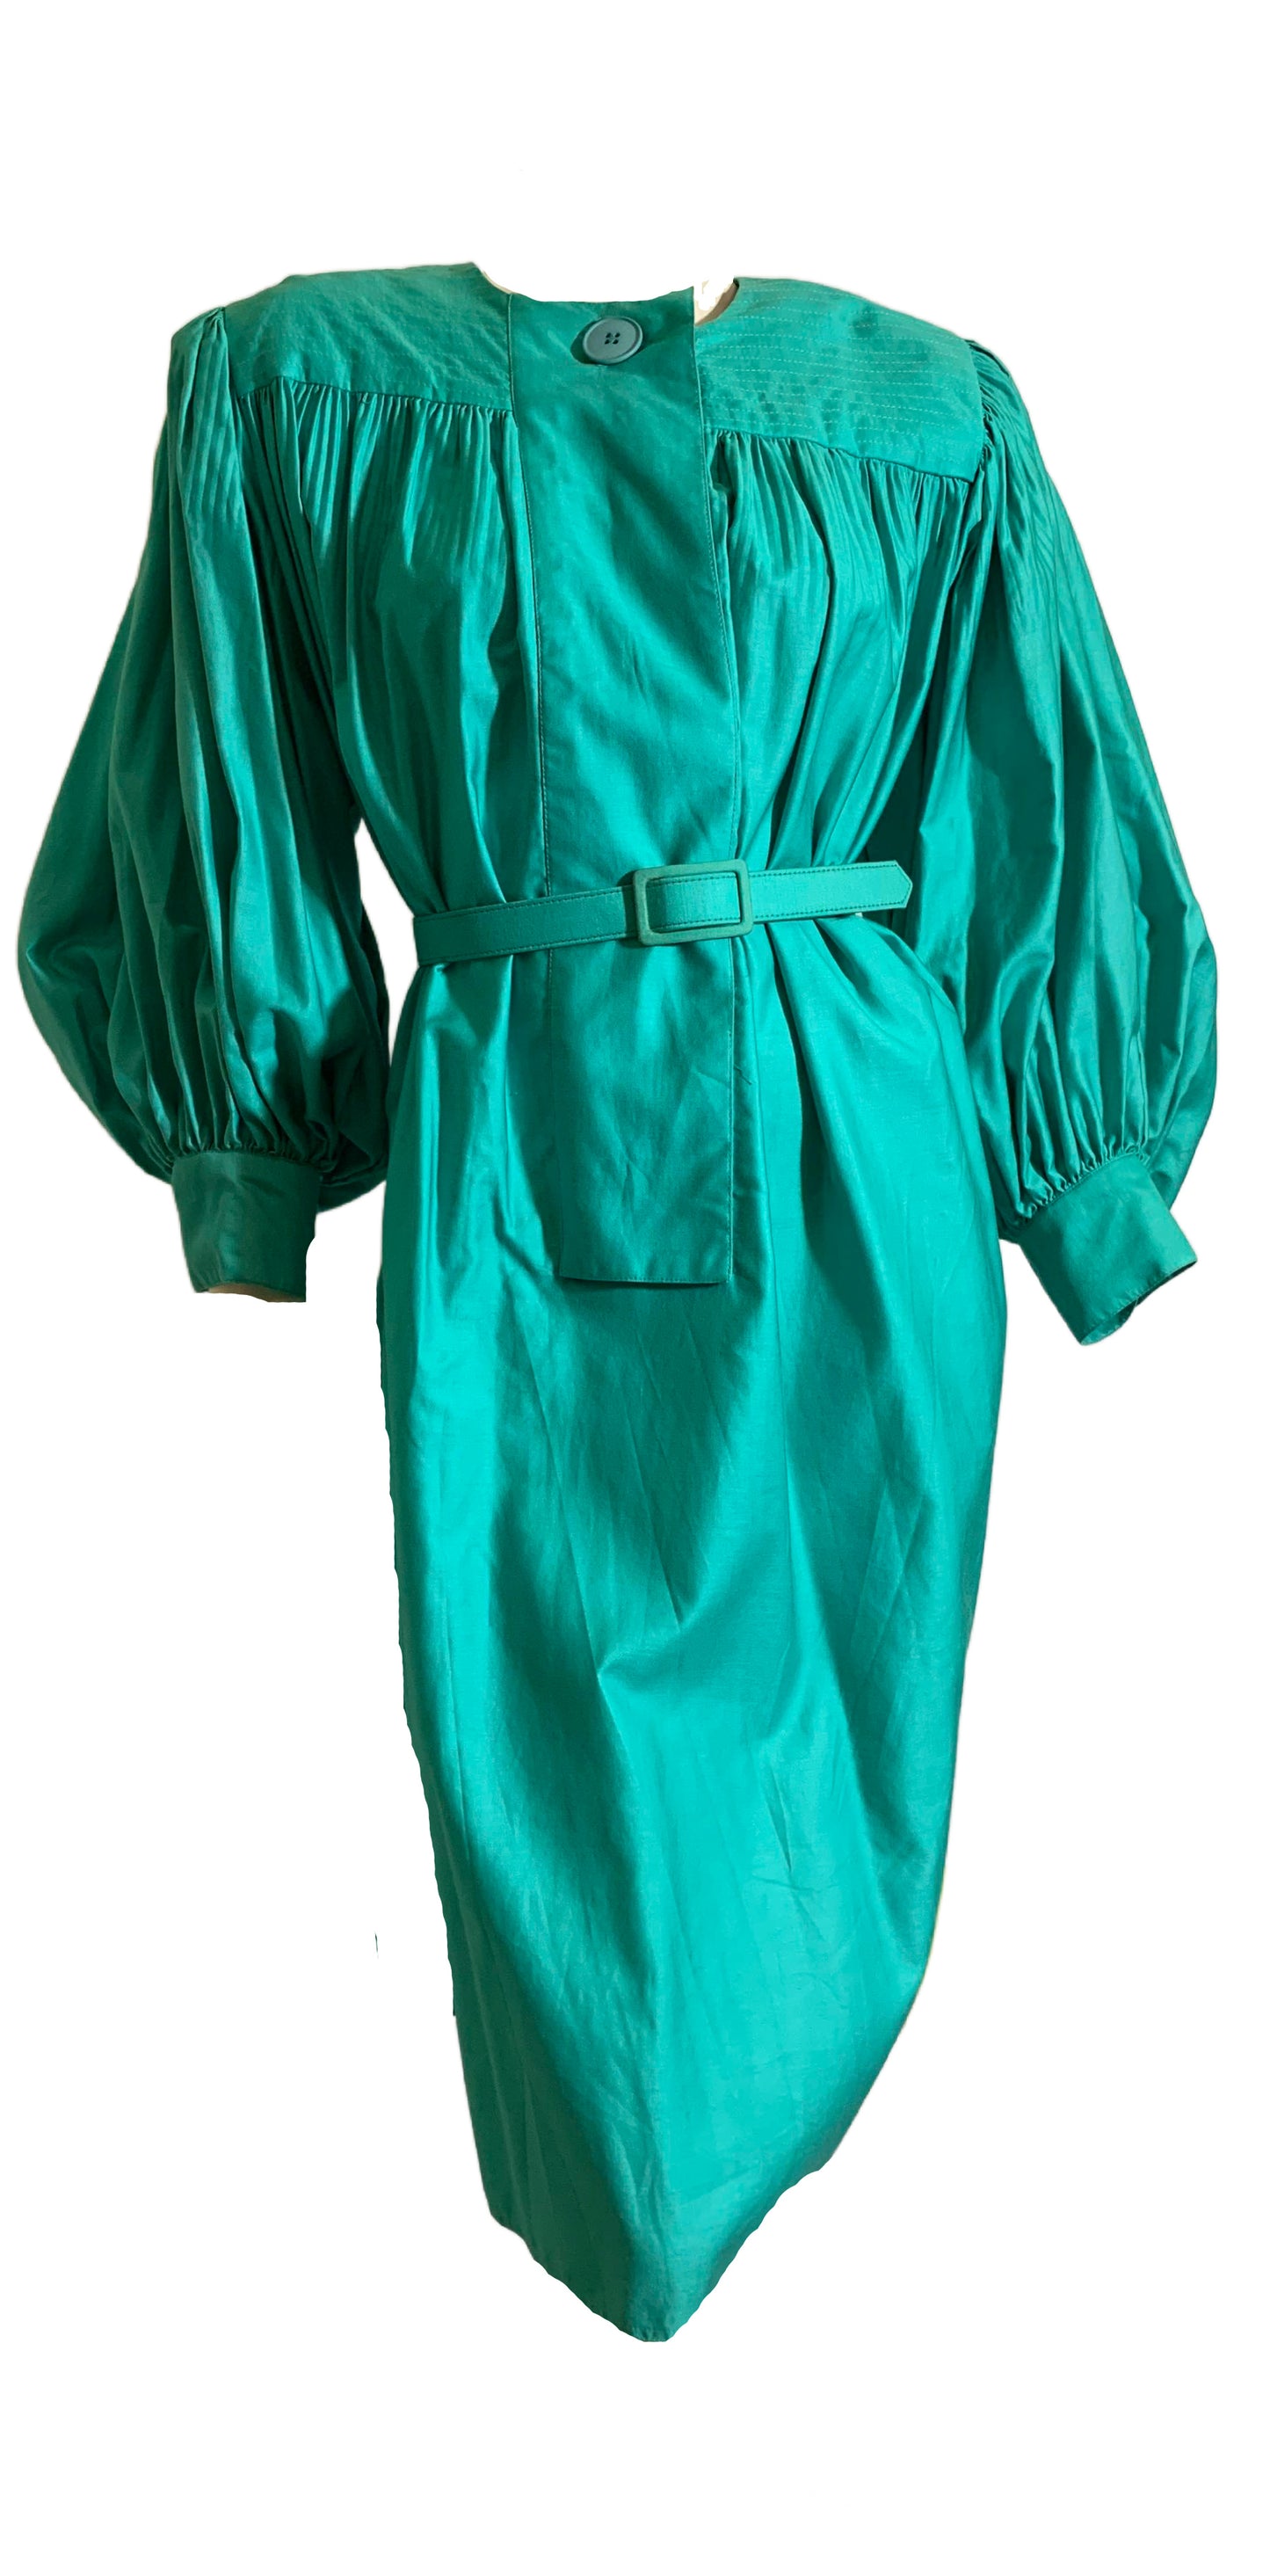 Bright Teal Cotton Belted Tent Dress with Voluminous Puff Sleeves circa 1980s